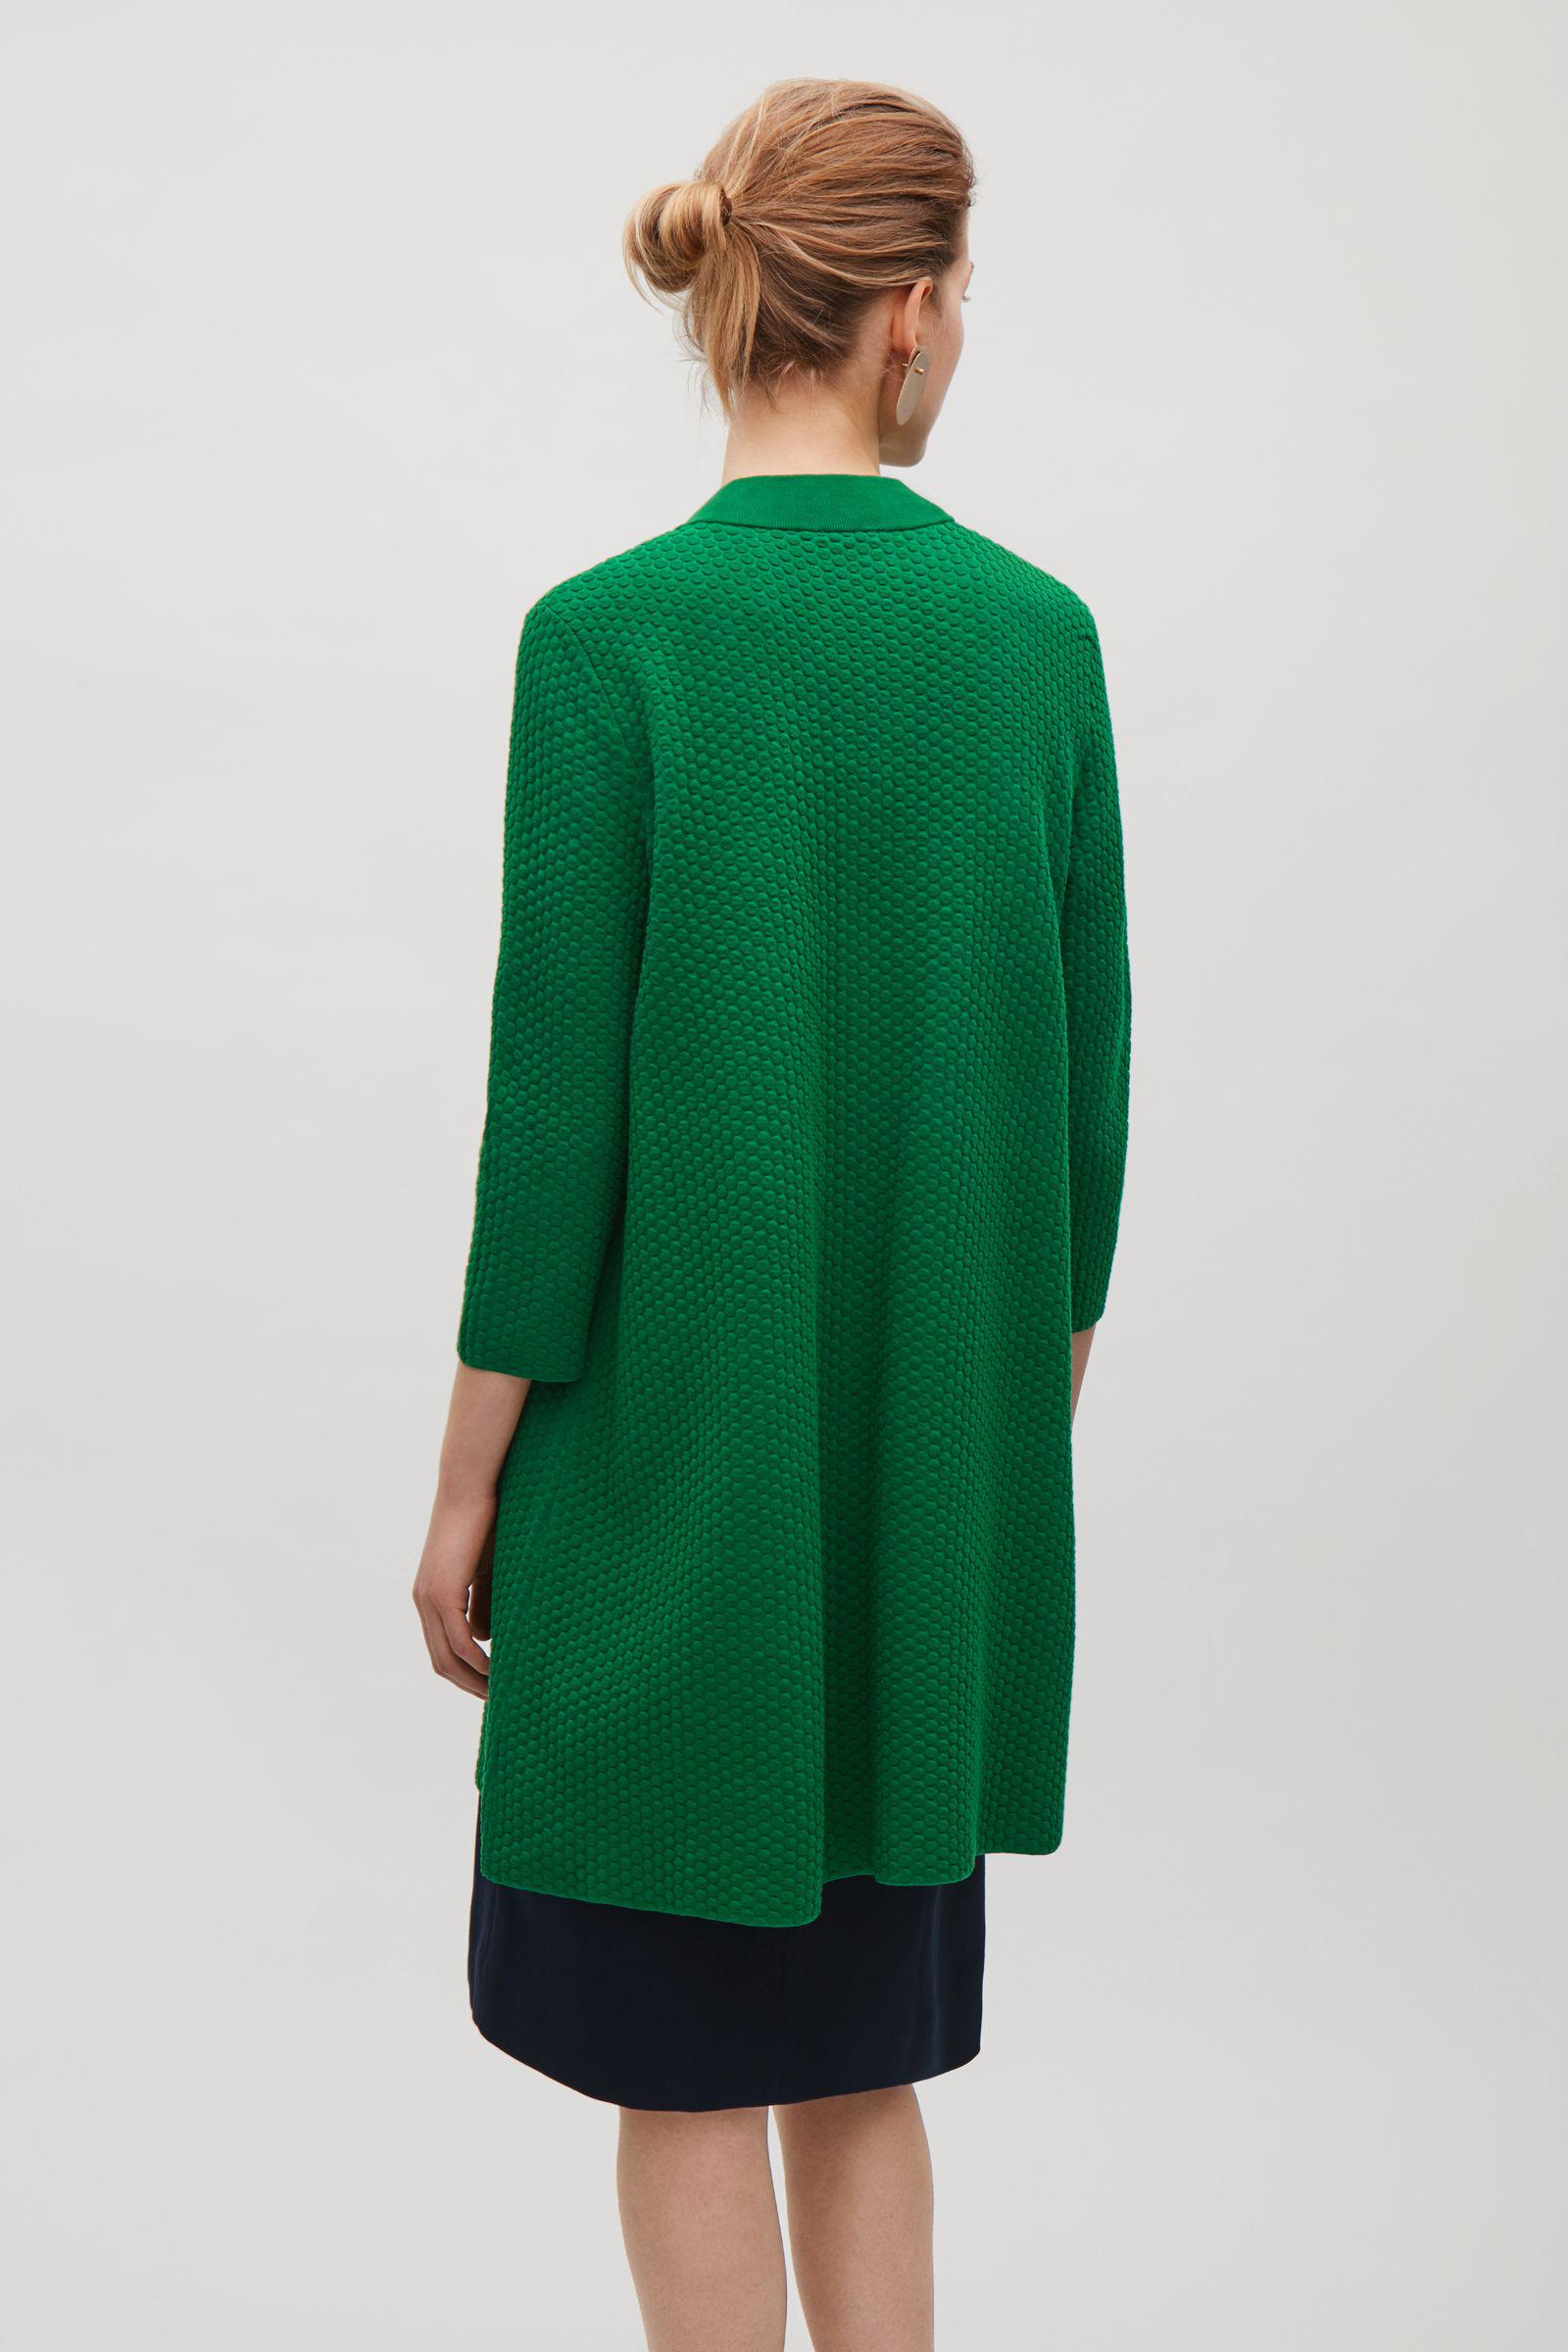 COS Synthetic Textured Knit Cardigan in Bottle Green (Green) - Lyst